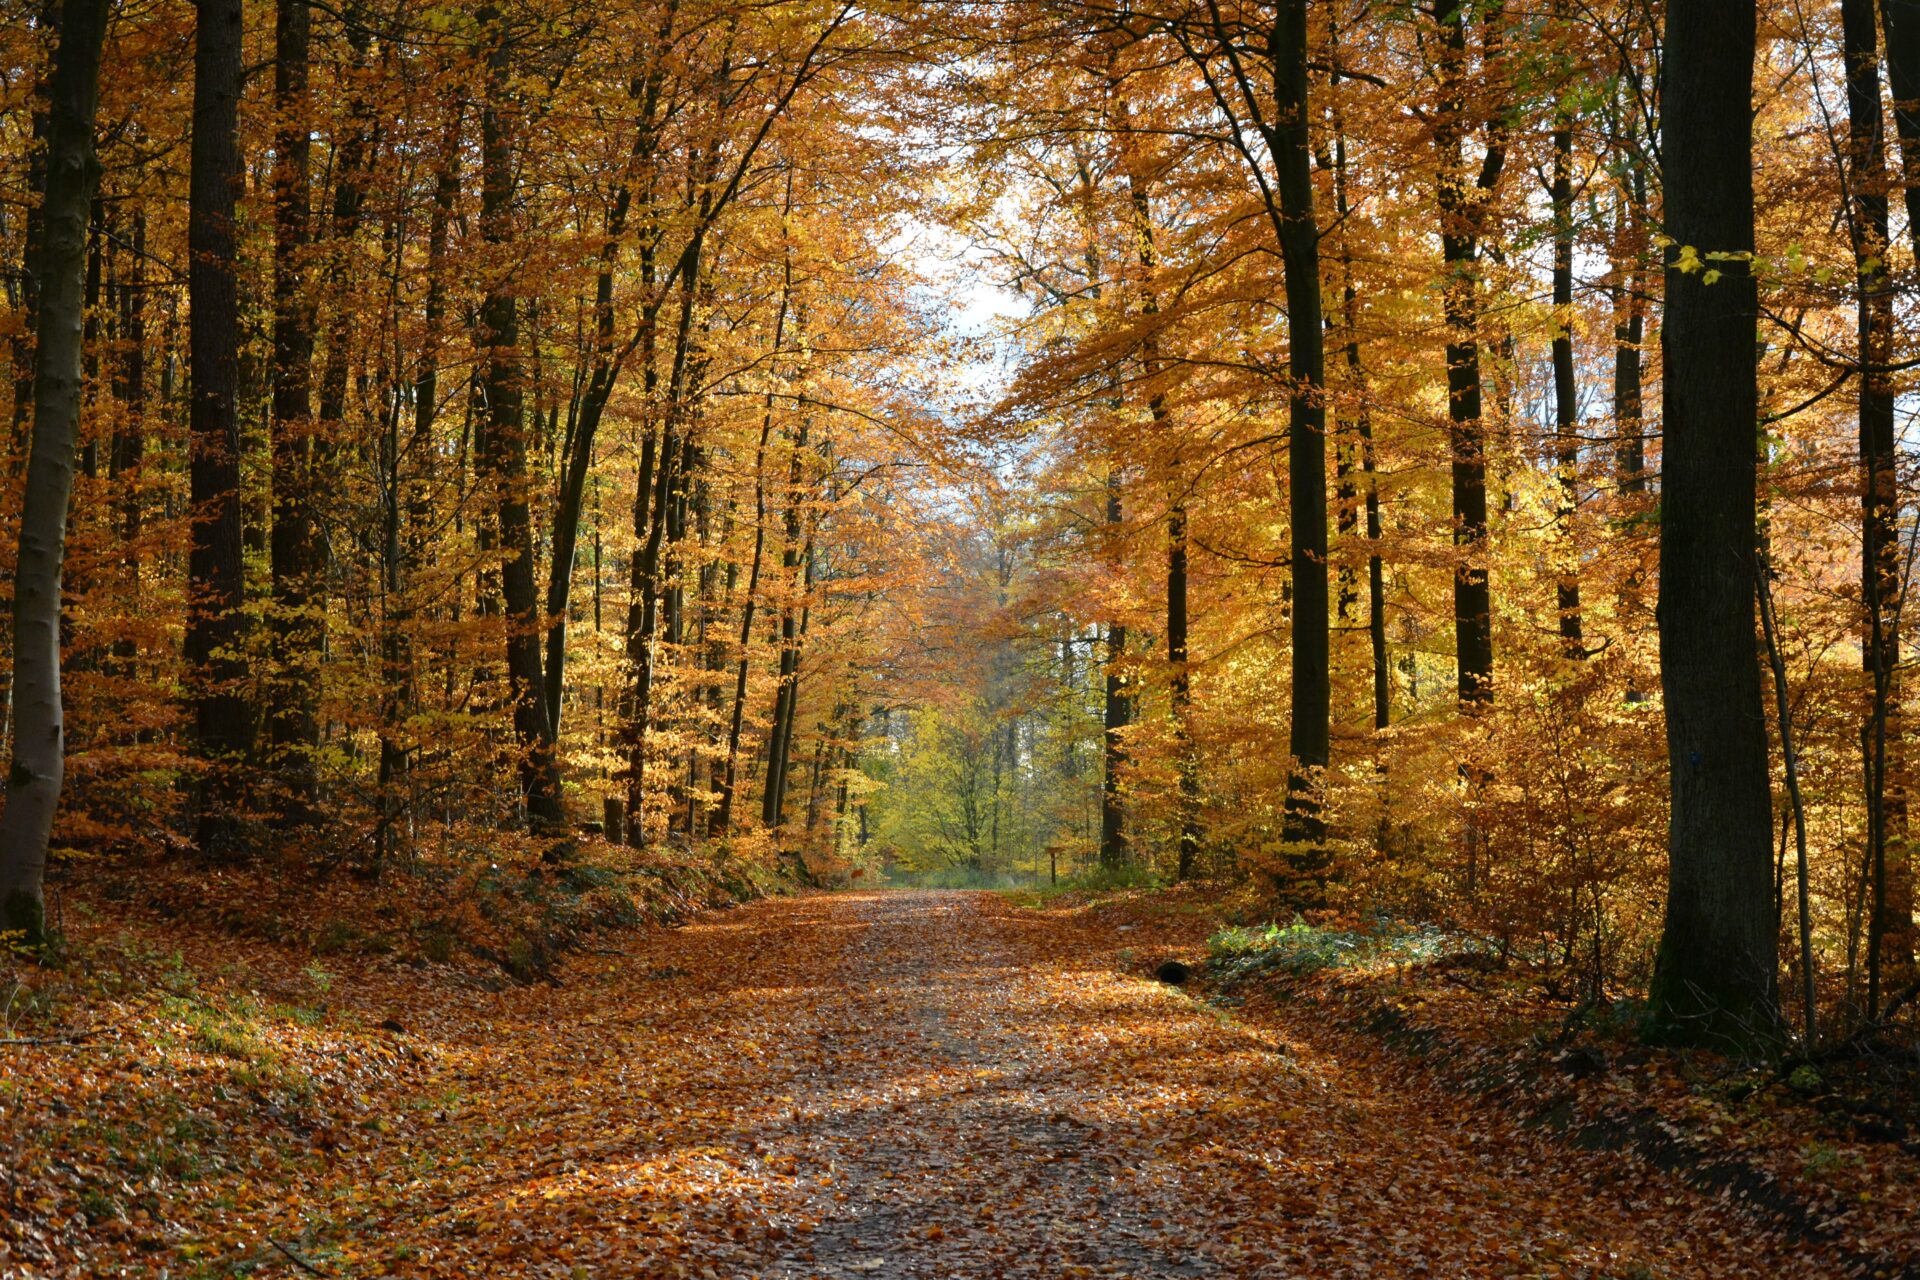 A gravel path through talls trees. The path has orange leaves on it, which have fallen from the surrounding trees.